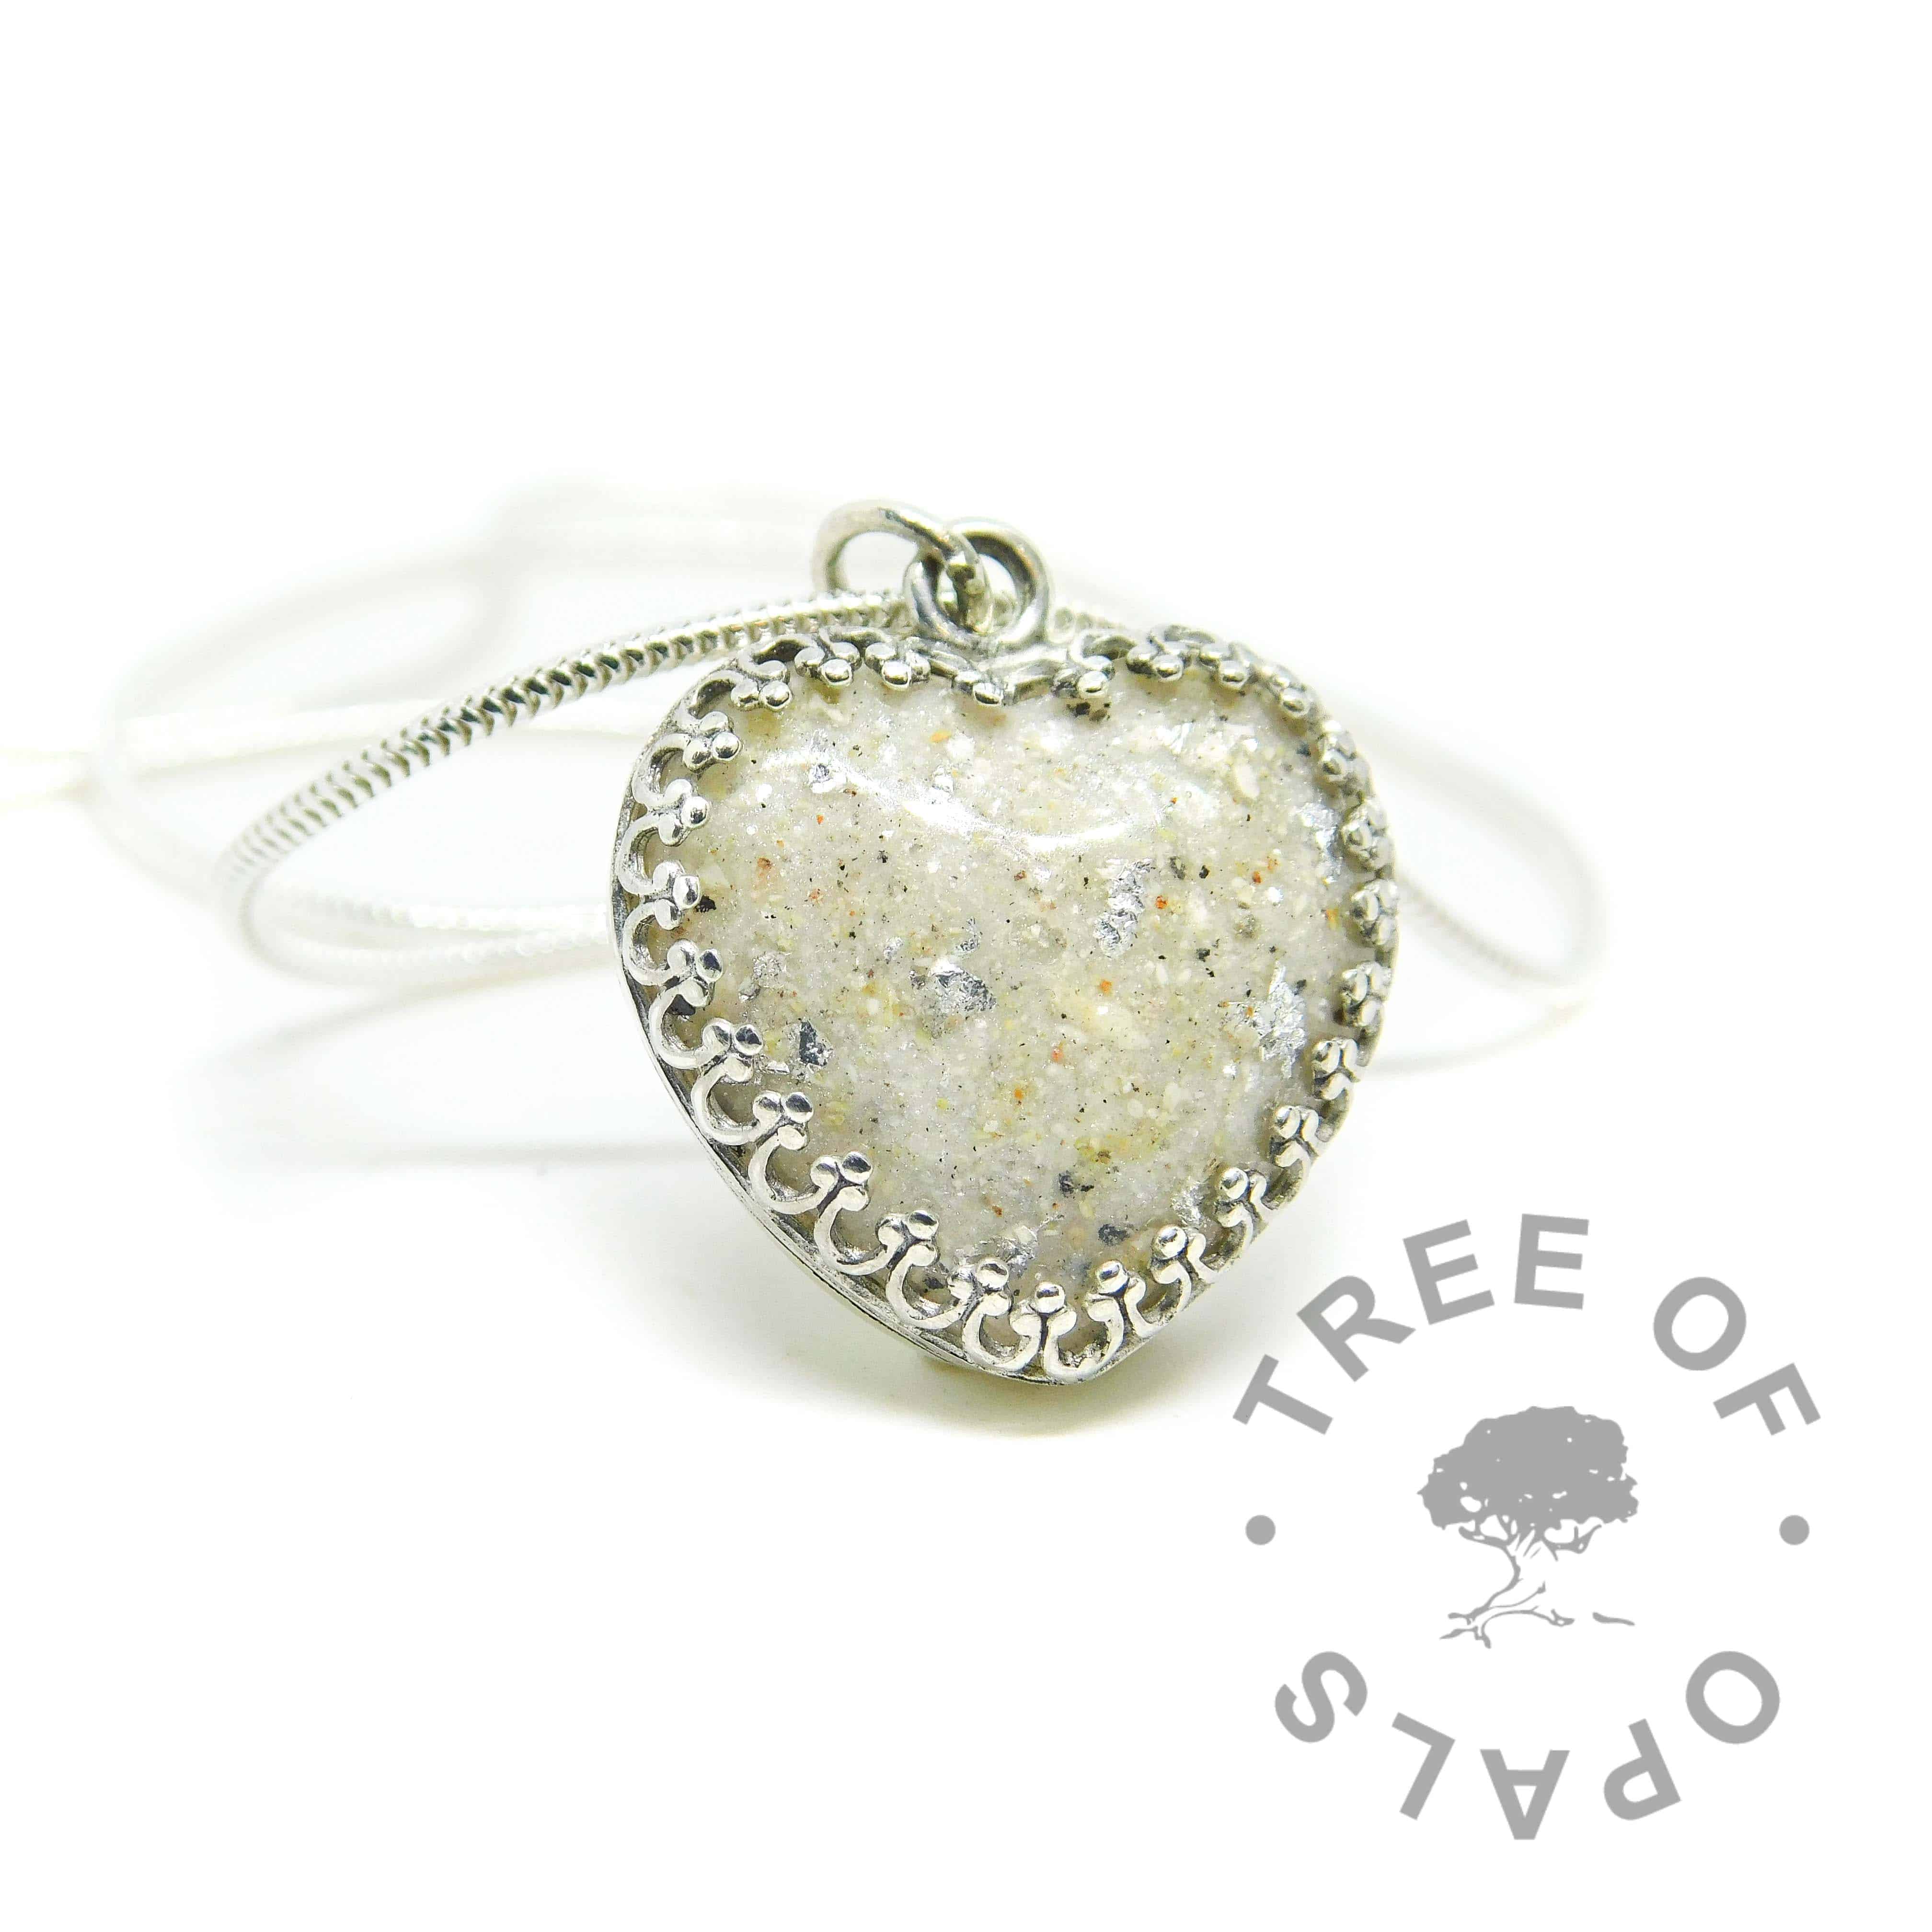 Cremation ash heart necklace with unicorn white resin sparkle mix, naturally dark ashes, silver leaf and no birthstone. Solid sterling silver 20mm crown point heart setting (925 stamped on the back). Lightweight snake chain necklace upgrade shown (sold separately). Watermarked copyright Tree of Opals memorial jewellery image